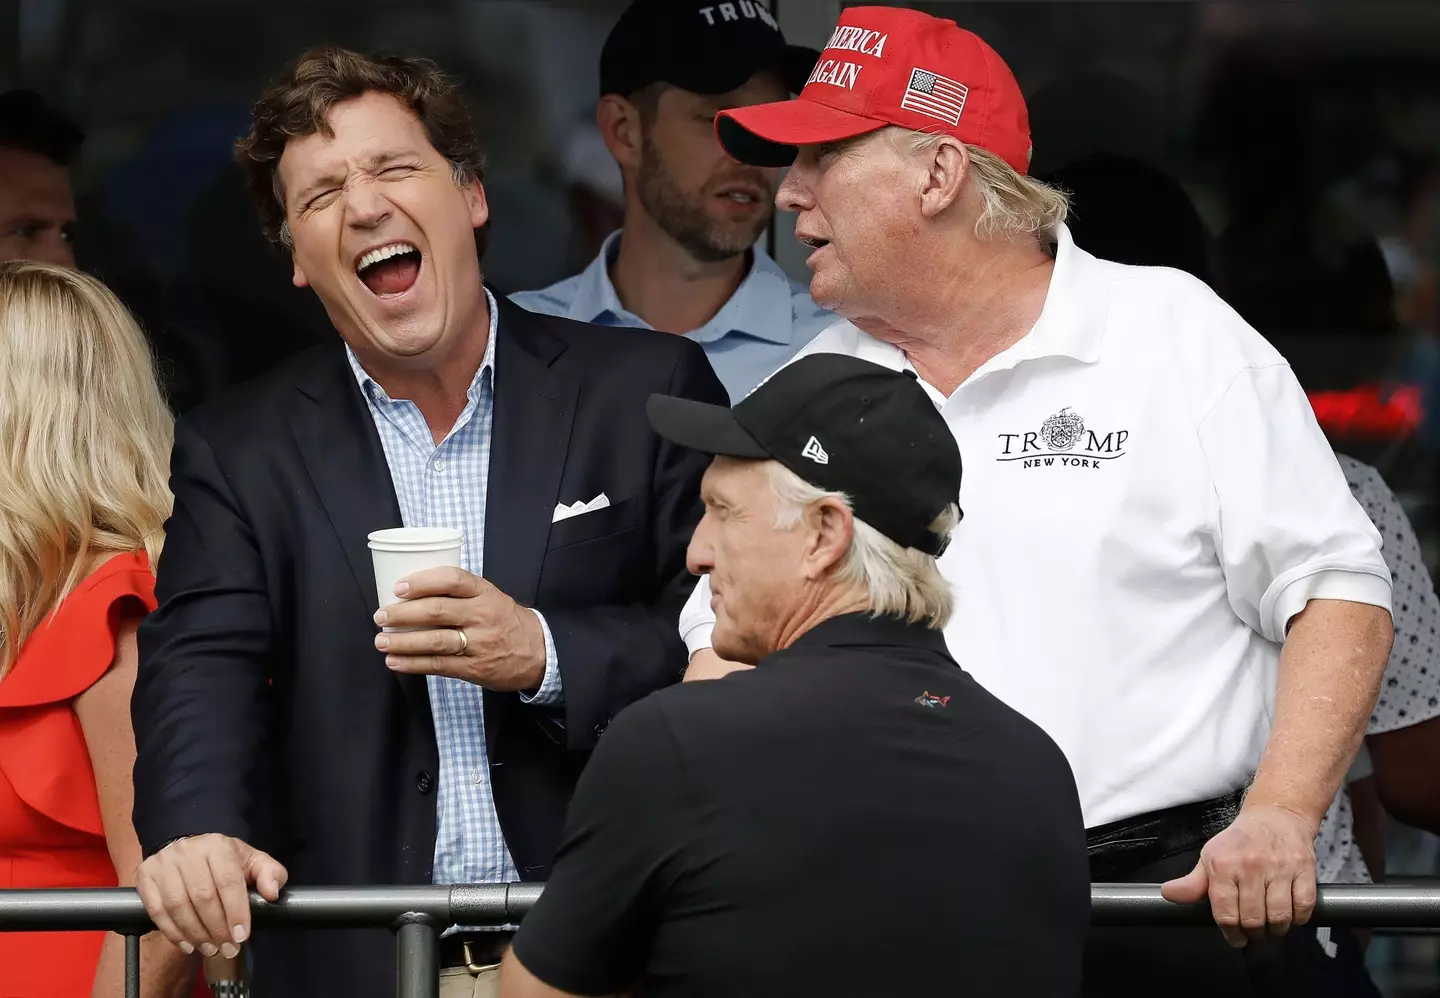 A former producer for Tucker Carlson's show on Fox News slammed people claiming the 2020 US election was rigged against Donald Trump.